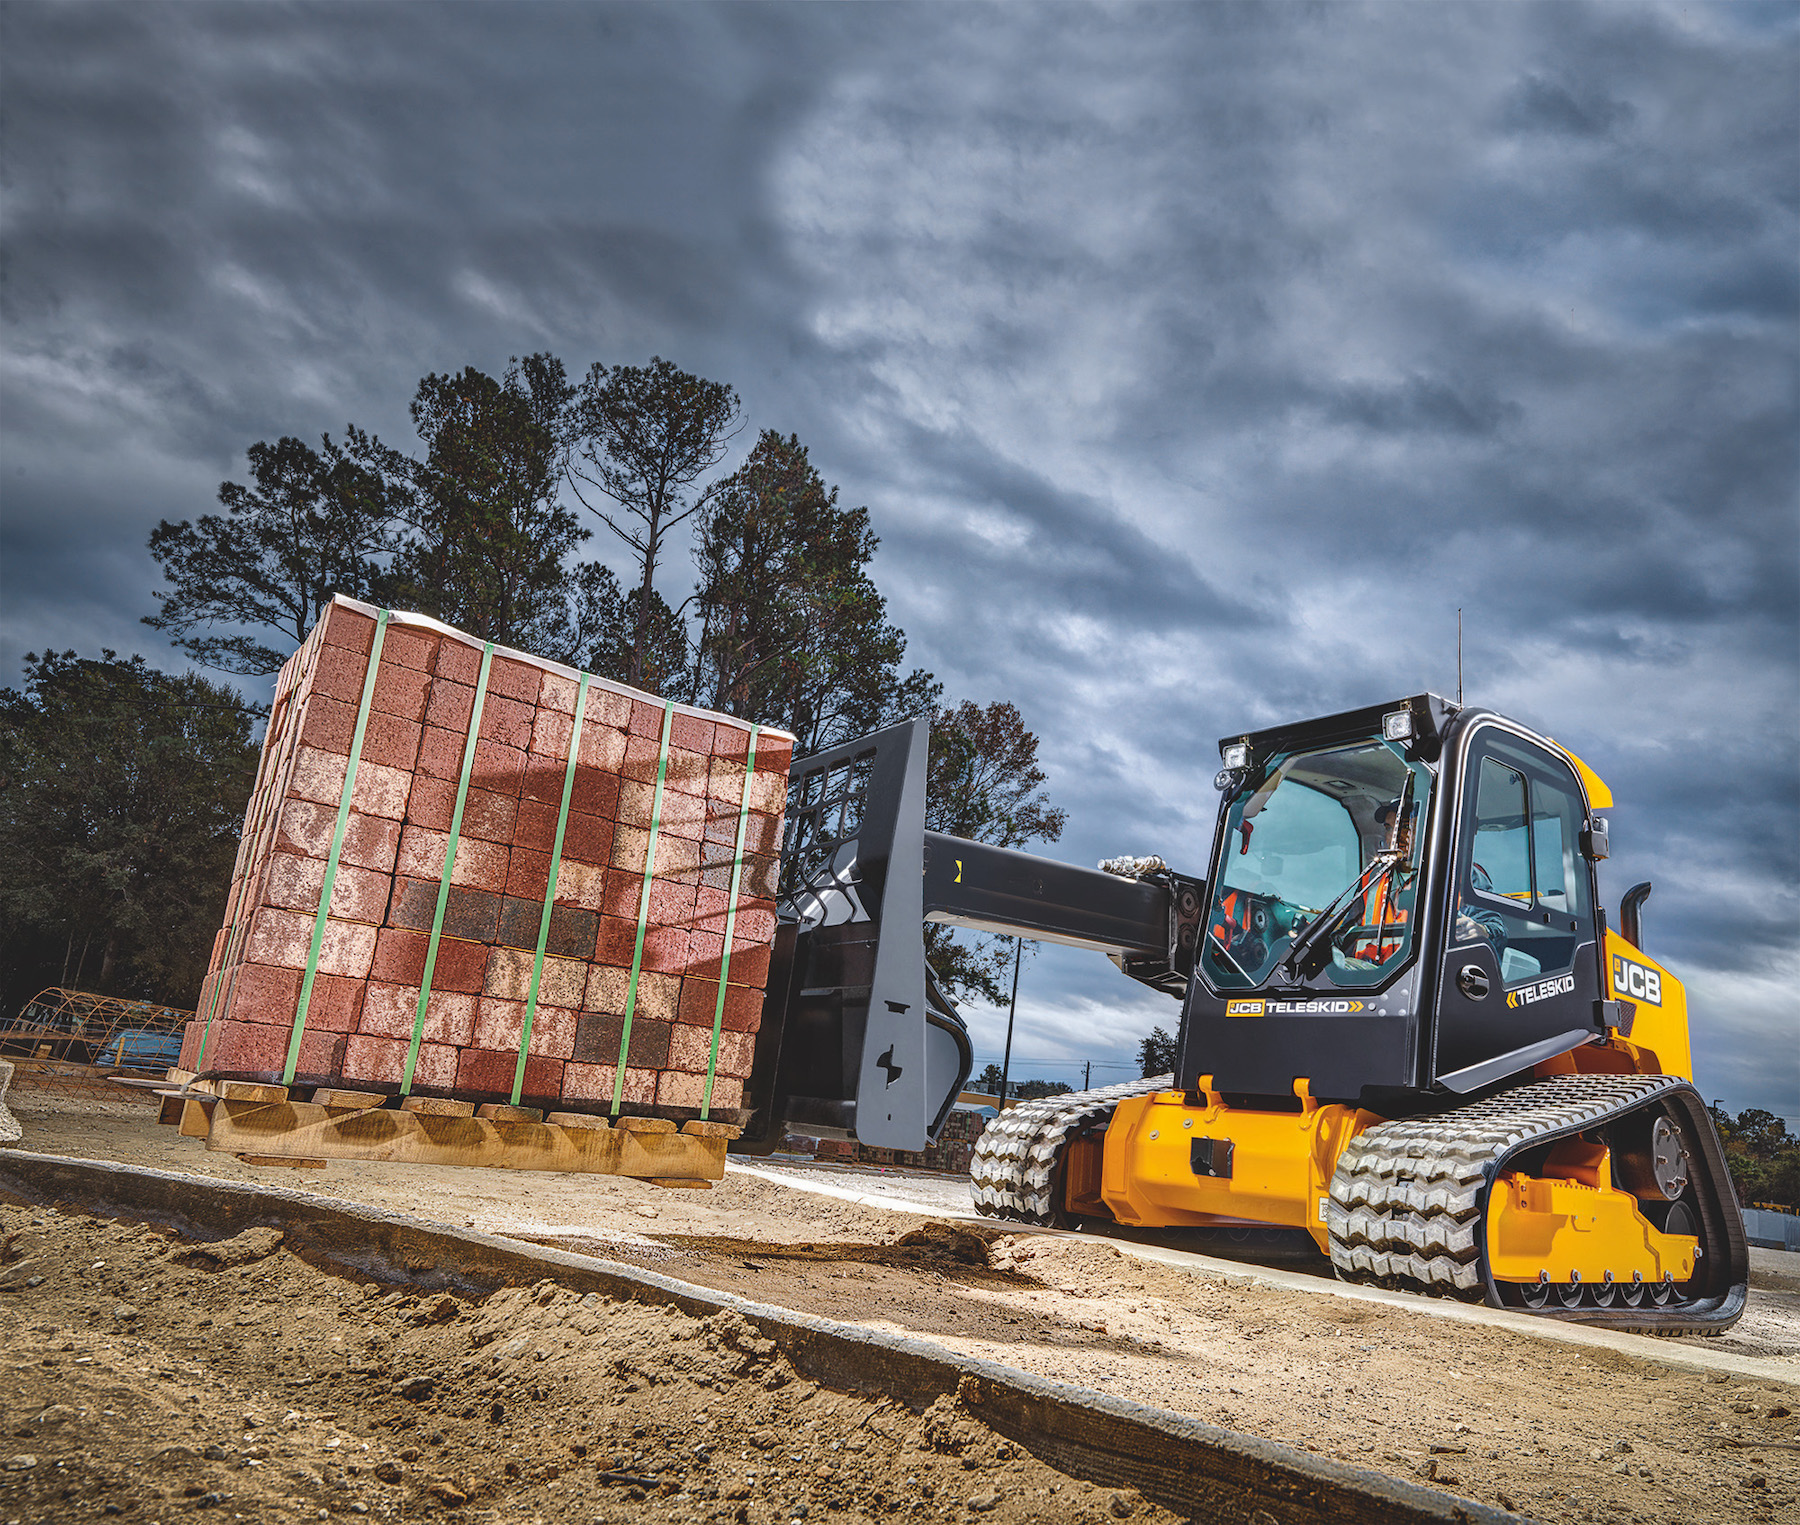 Launched in March 2017, the JCB Teleskid is the world’s first and only skid steer and compact track loader with a telescopic boom. Teleskid is now recognized as the most awarded skid steer in history.